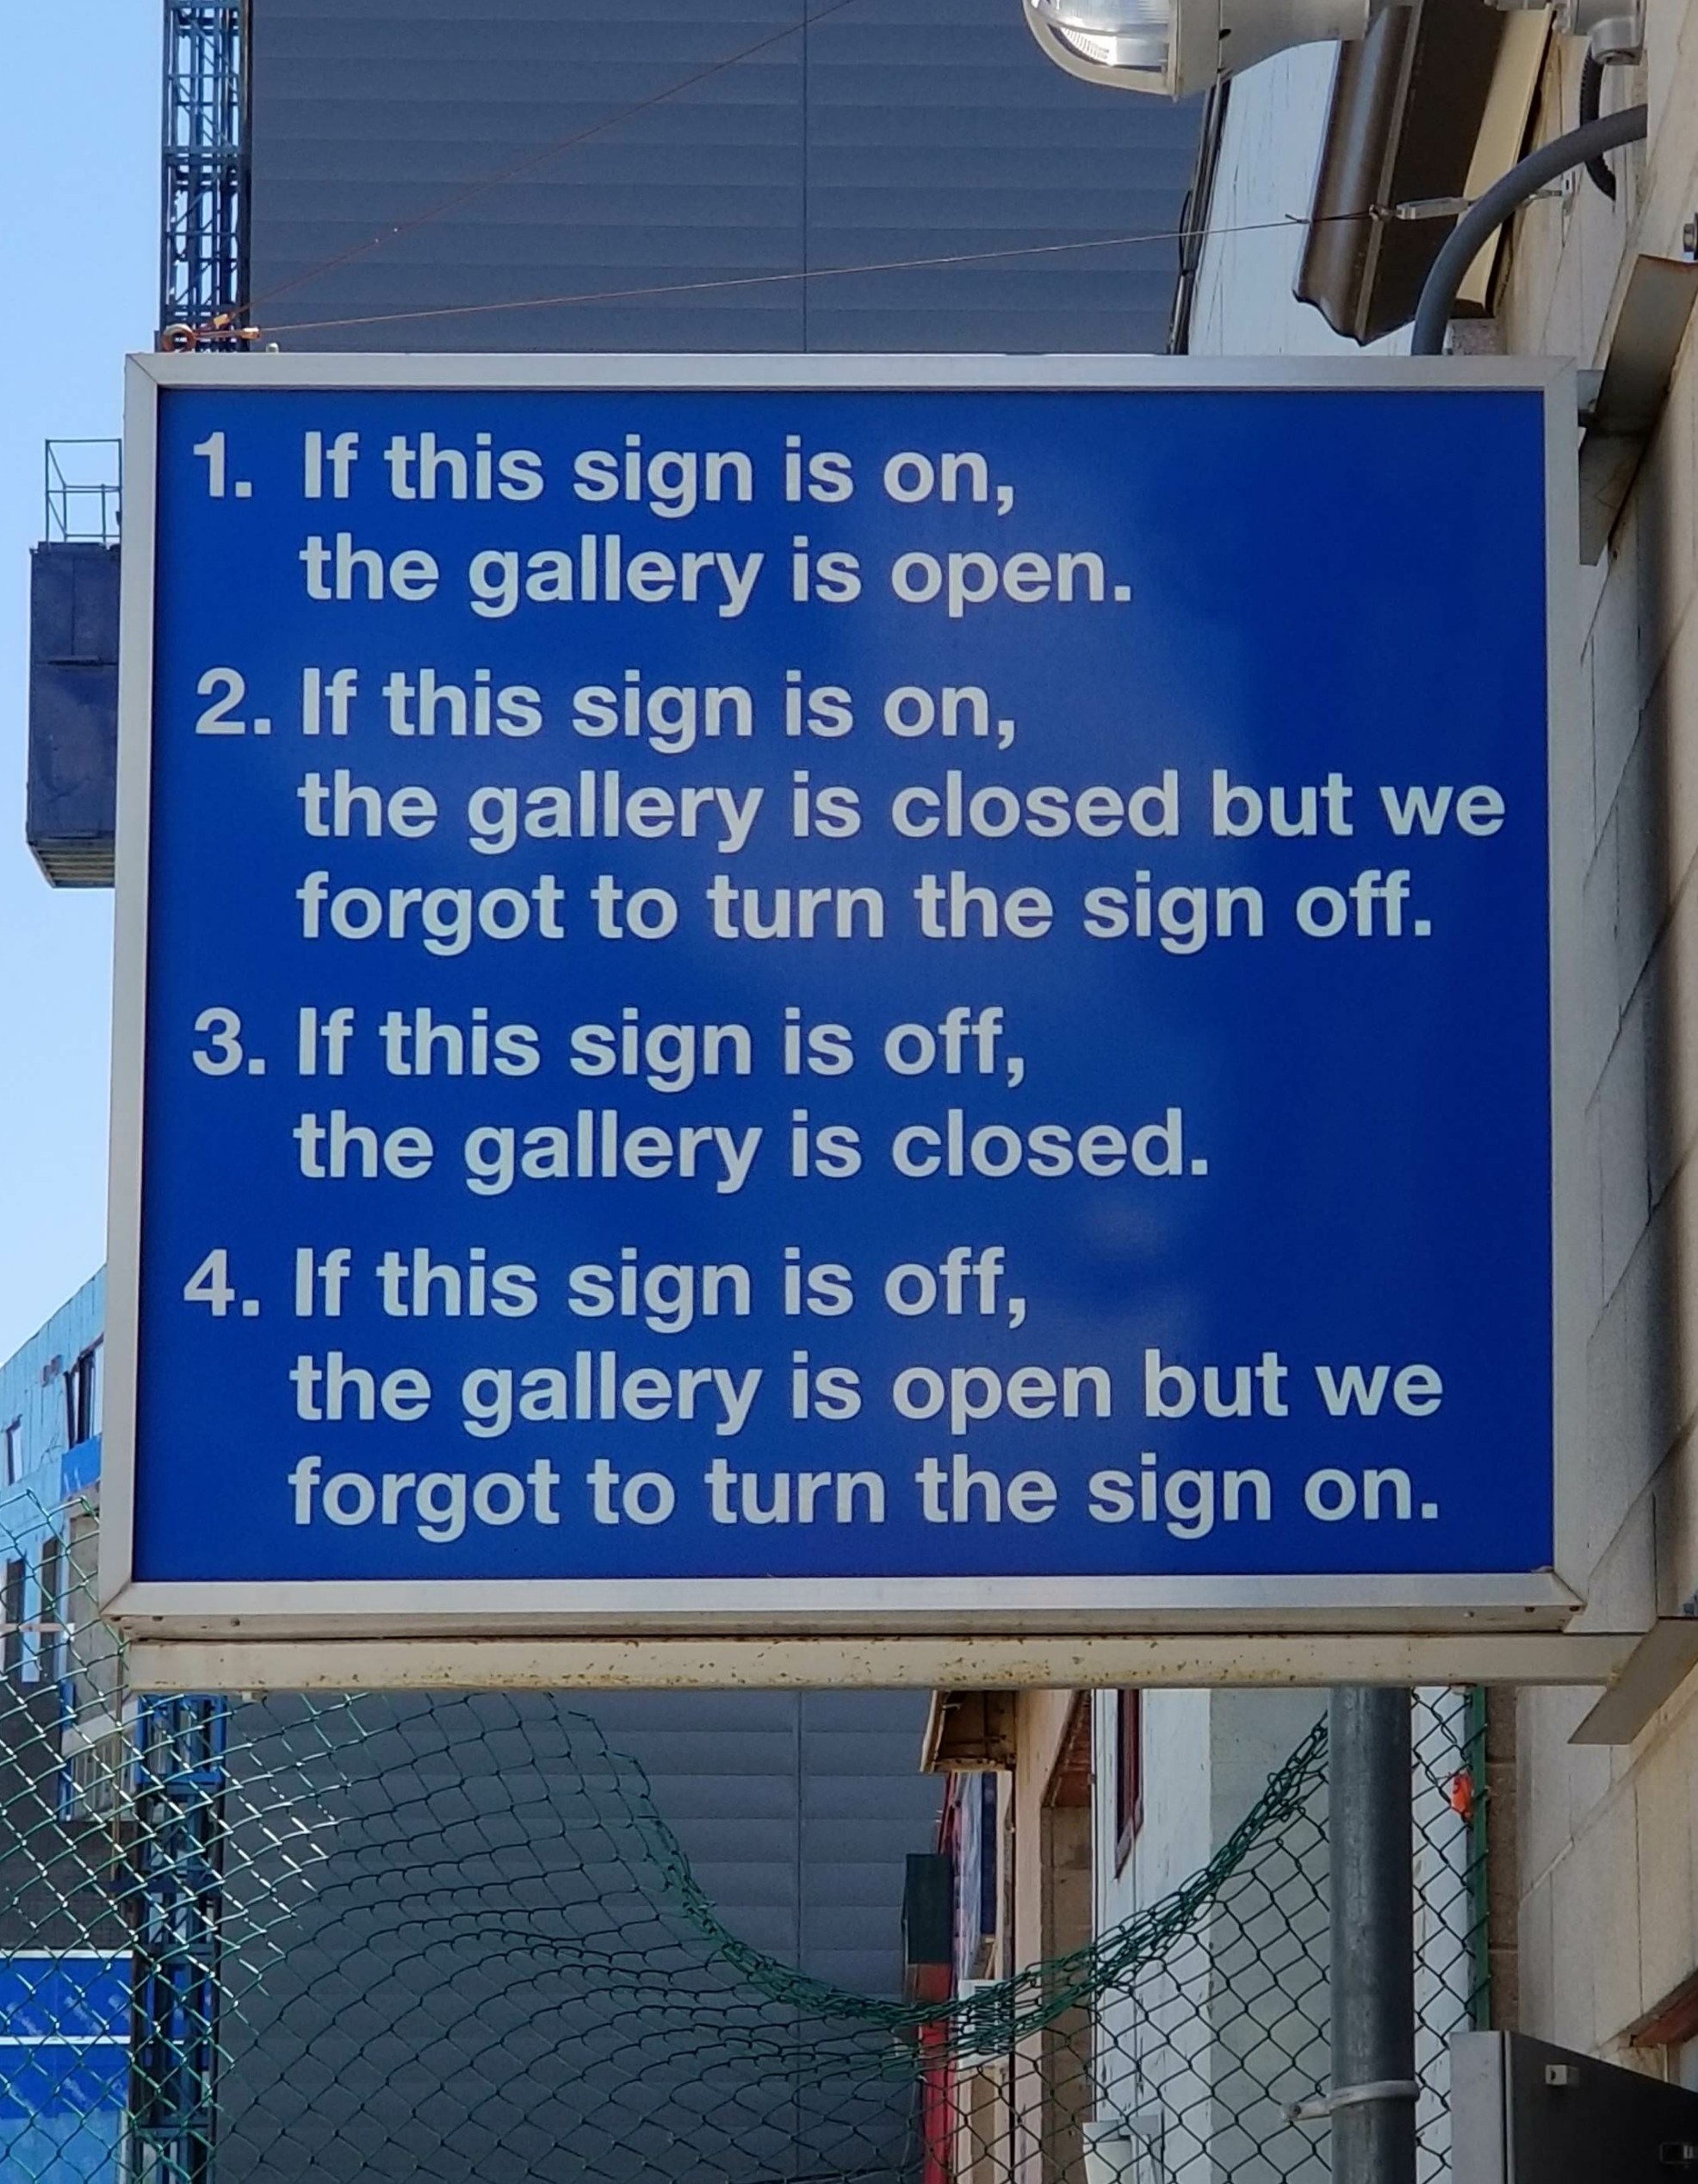 street sign - 1. If this sign is on, the gallery is open. 2. If this sign is on, the gallery is closed but we forgot to turn the sign off. 3. If this sign is off, the gallery is closed. 4. If this sign is off, the gallery is open but we forgot to turn the